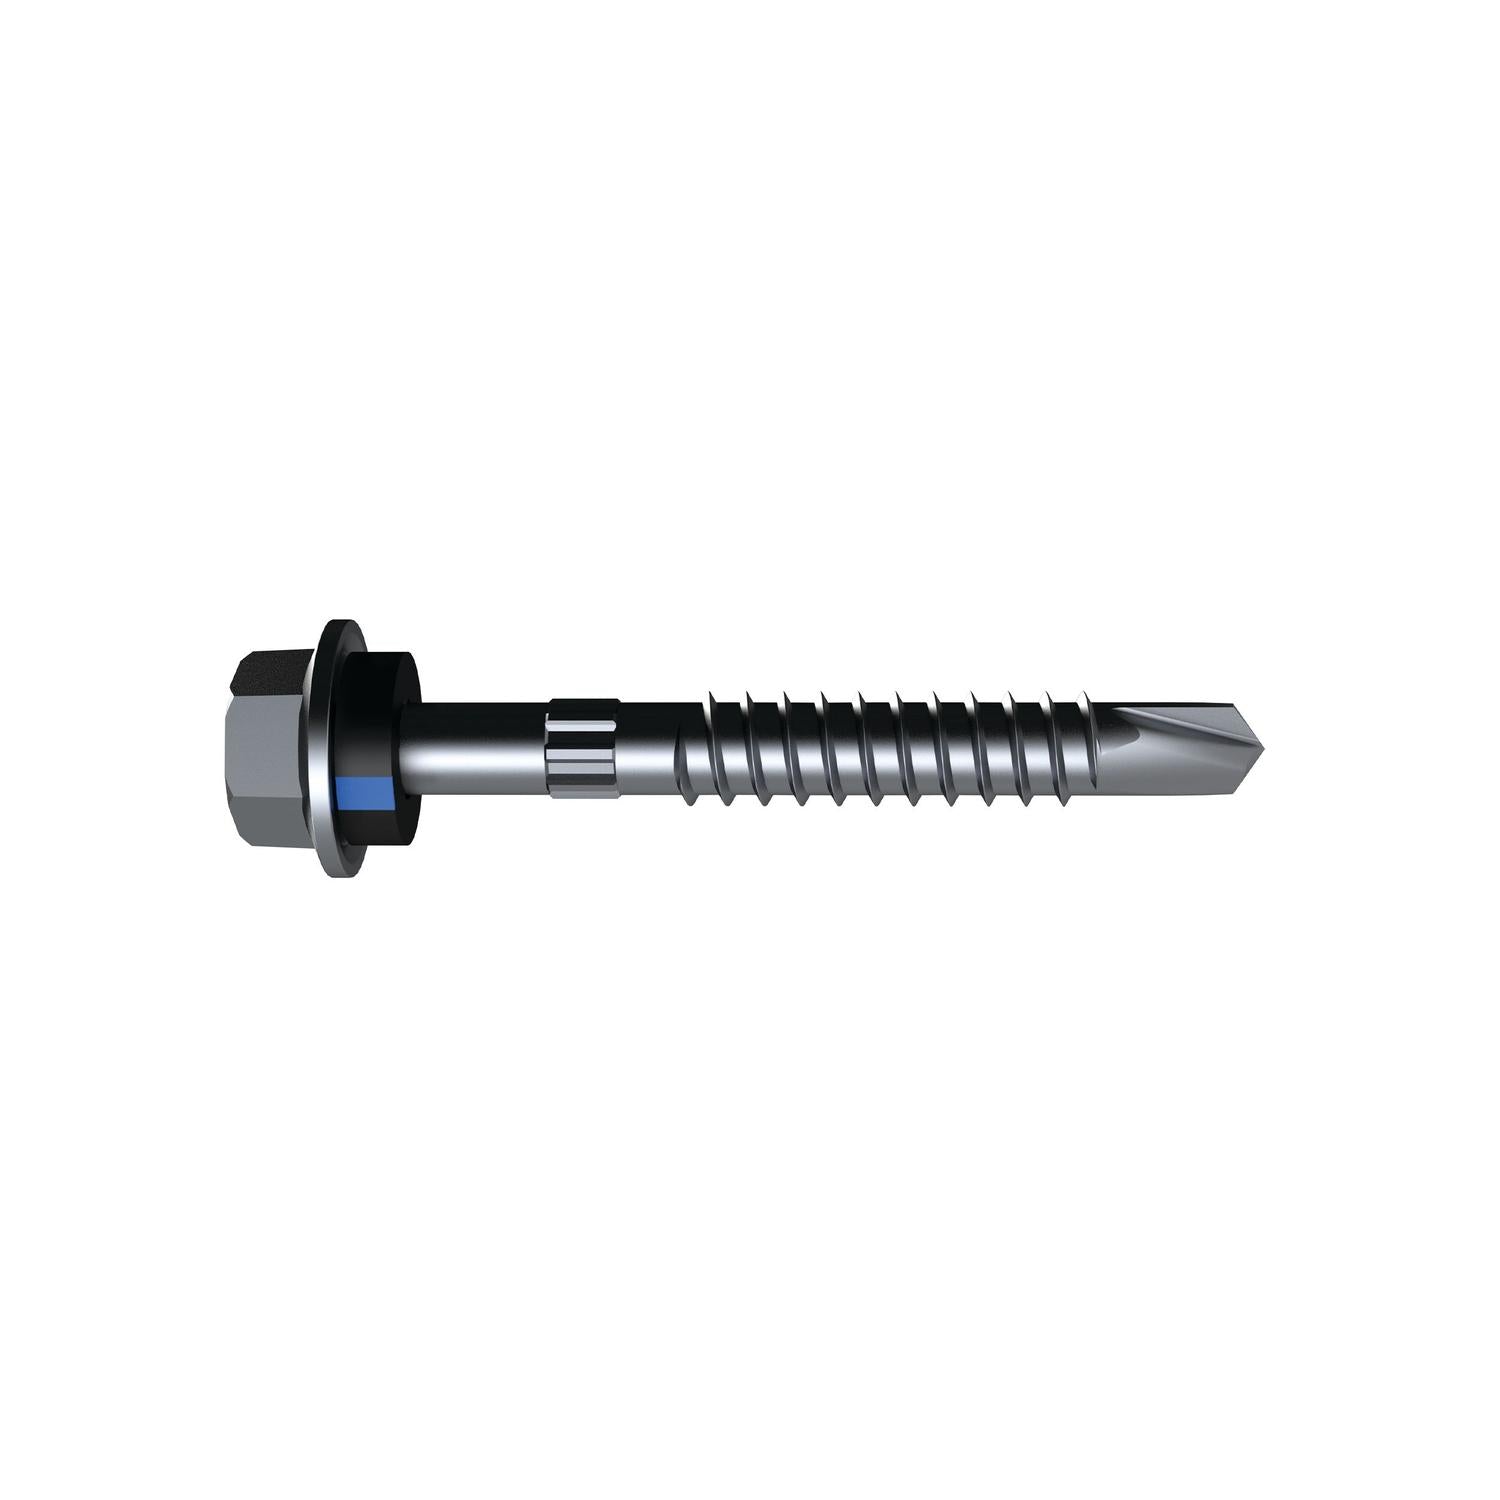 Bremick Heavy Duty Metal Screws with Neo/Seal 14G x 65mm